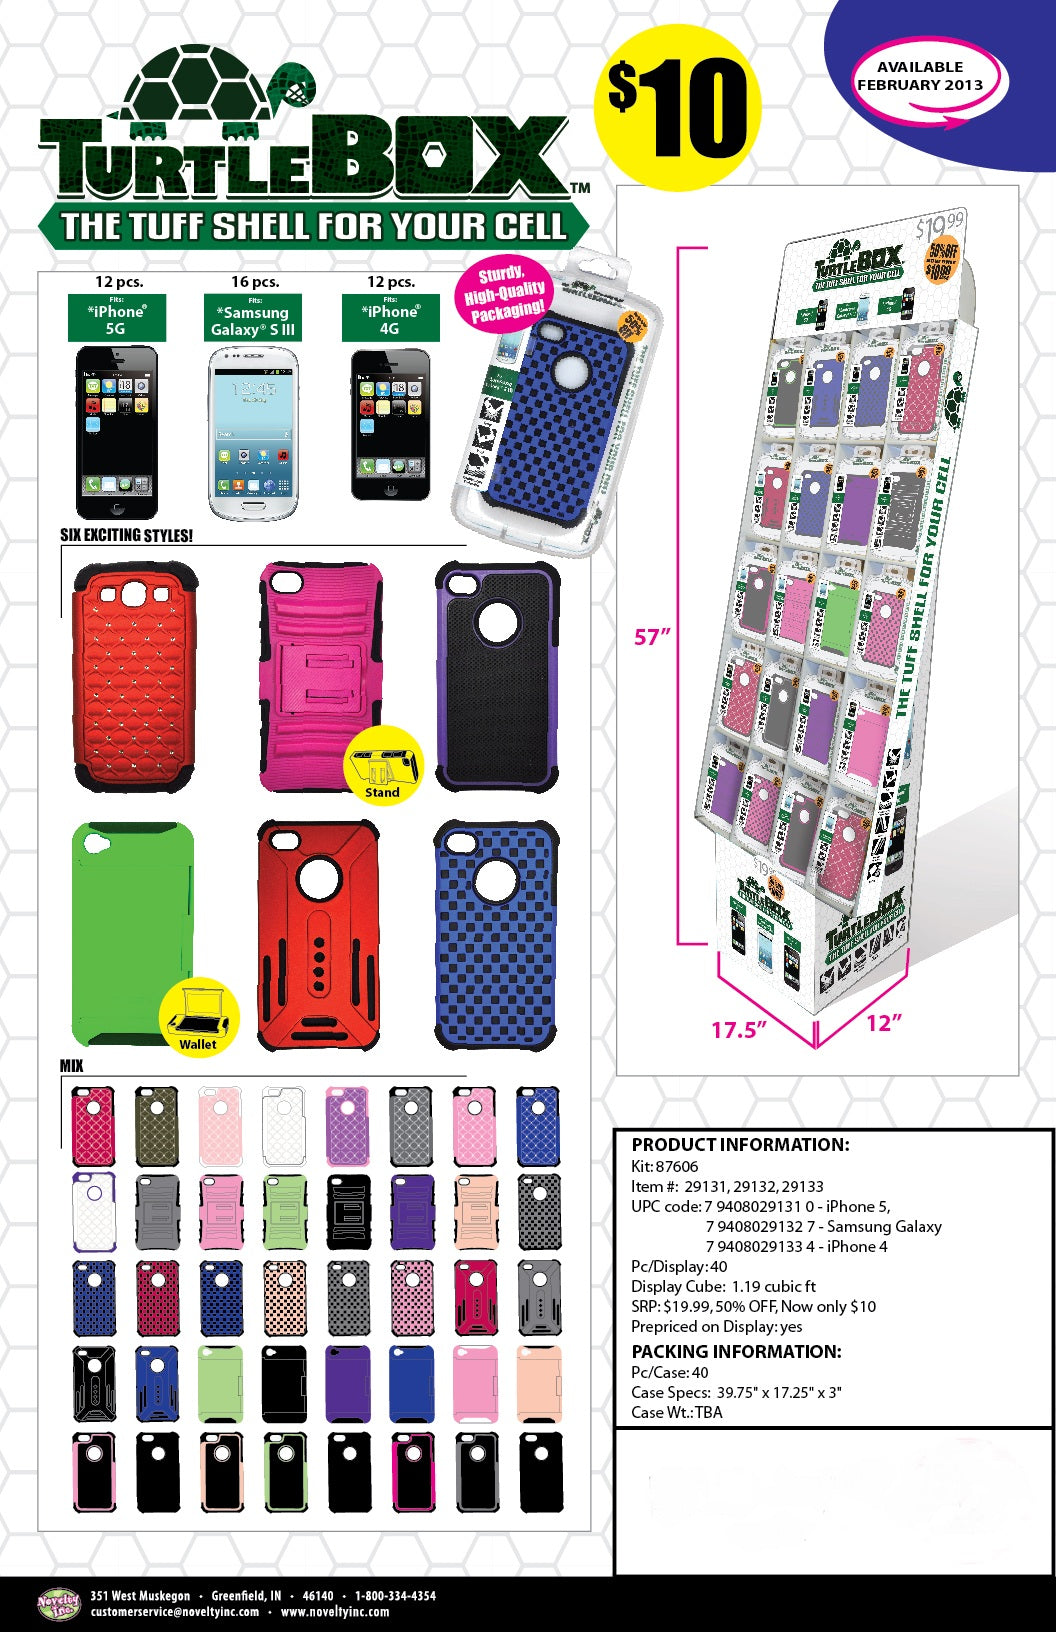 ITEM NUMBER 087606 SILICONE CELL CASE FLOOR DISPLAY  40 PIECES PER DISPLAY